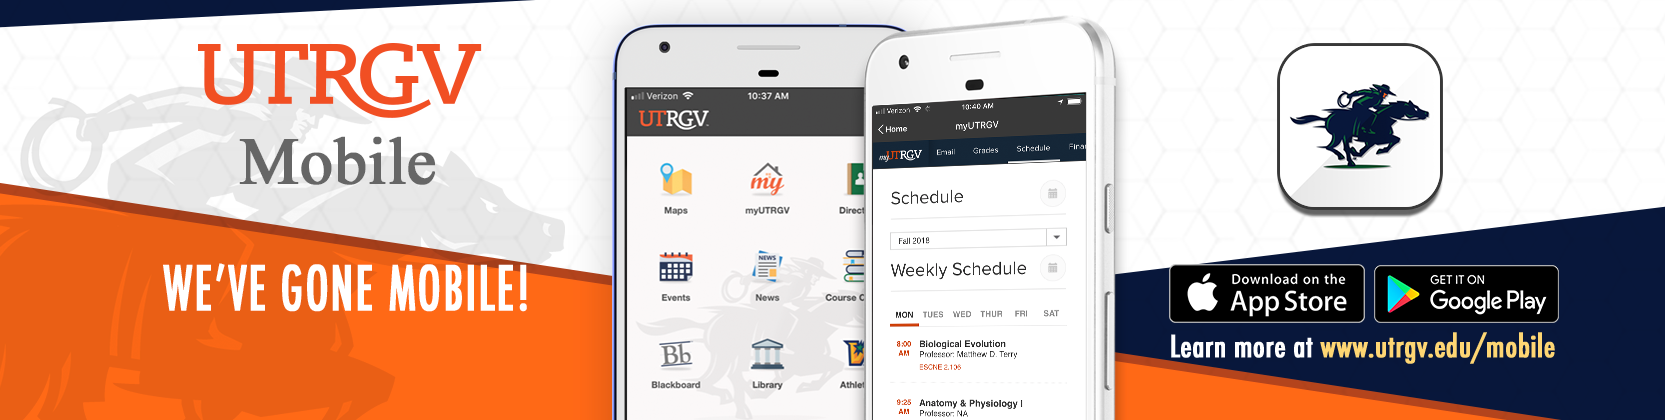 Download the UTRGV mobile app from the App Store and Google Play